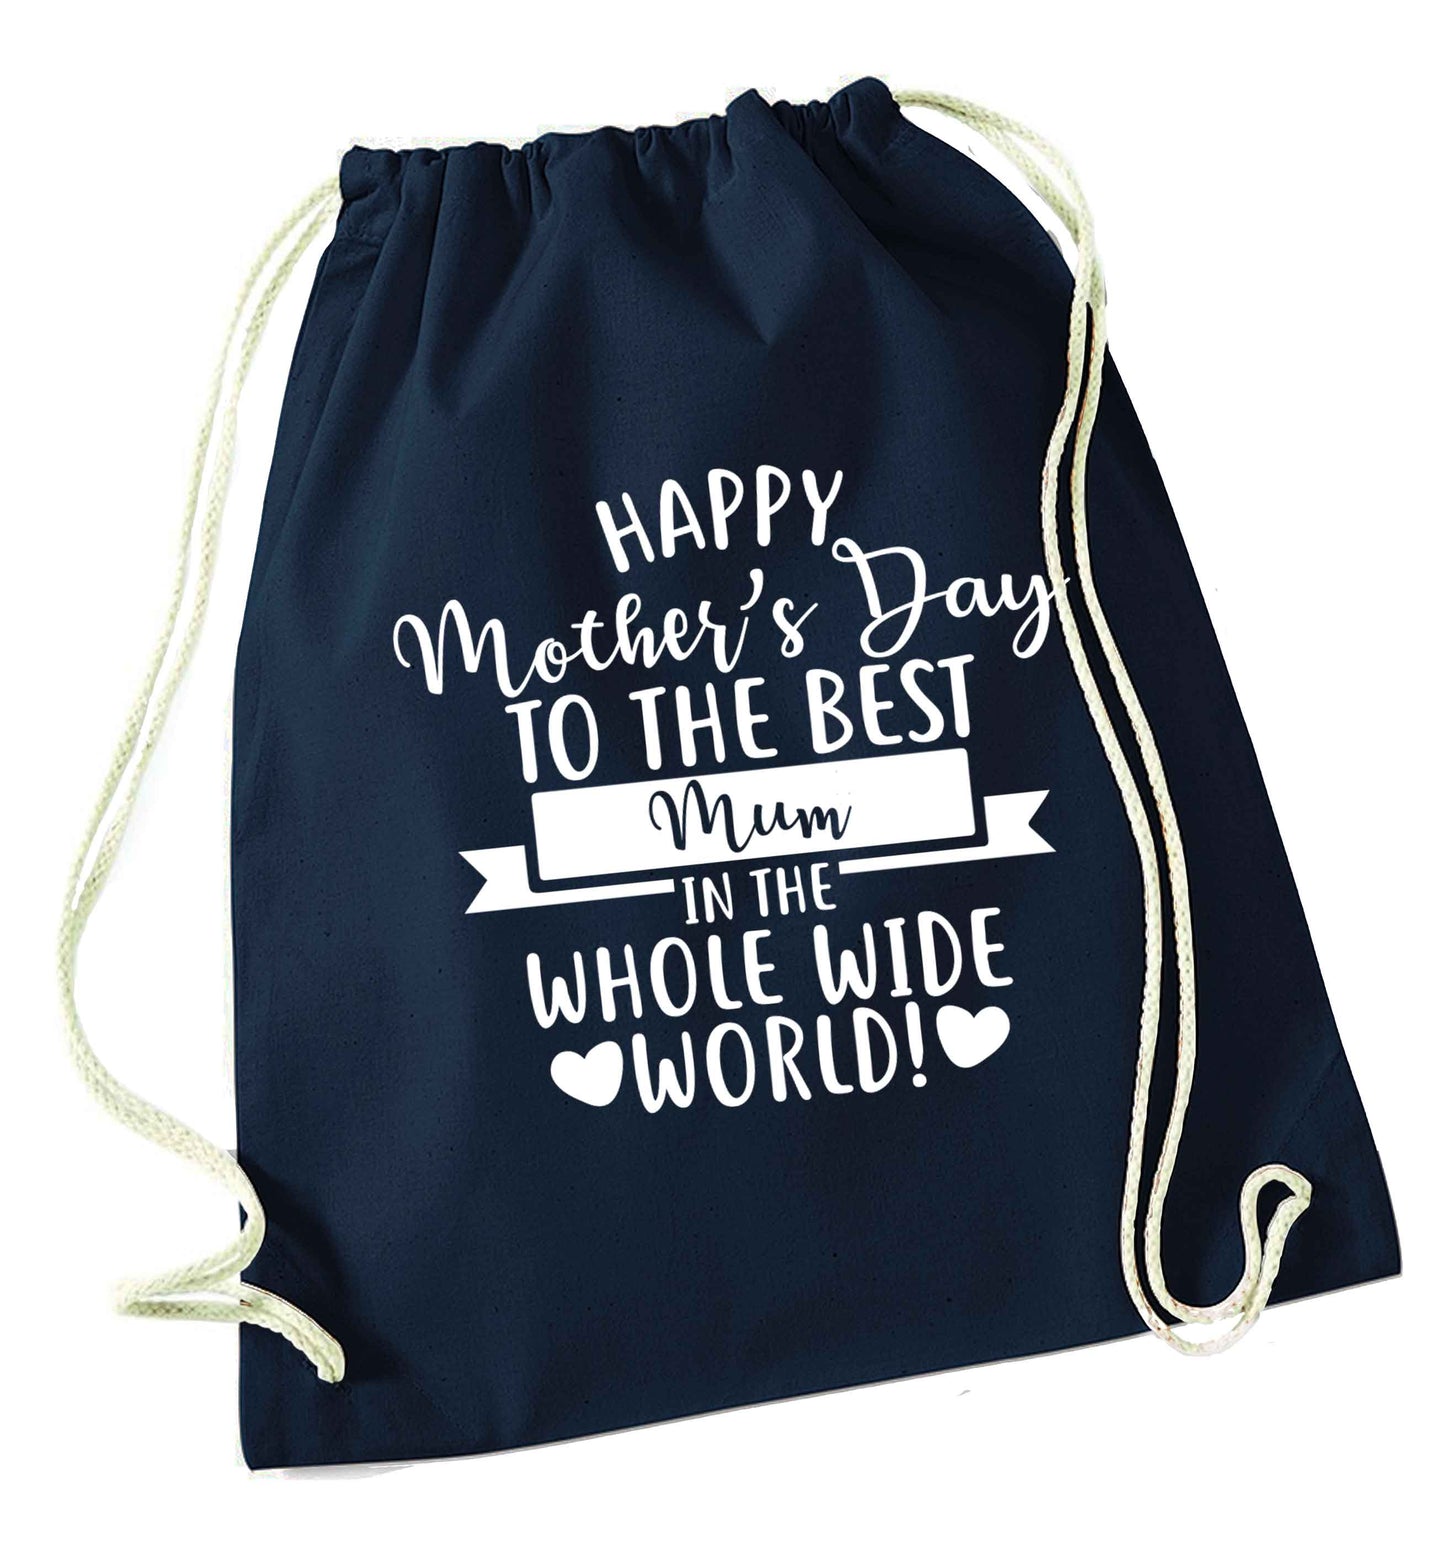 Happy mother's day to the best mum in the world navy drawstring bag